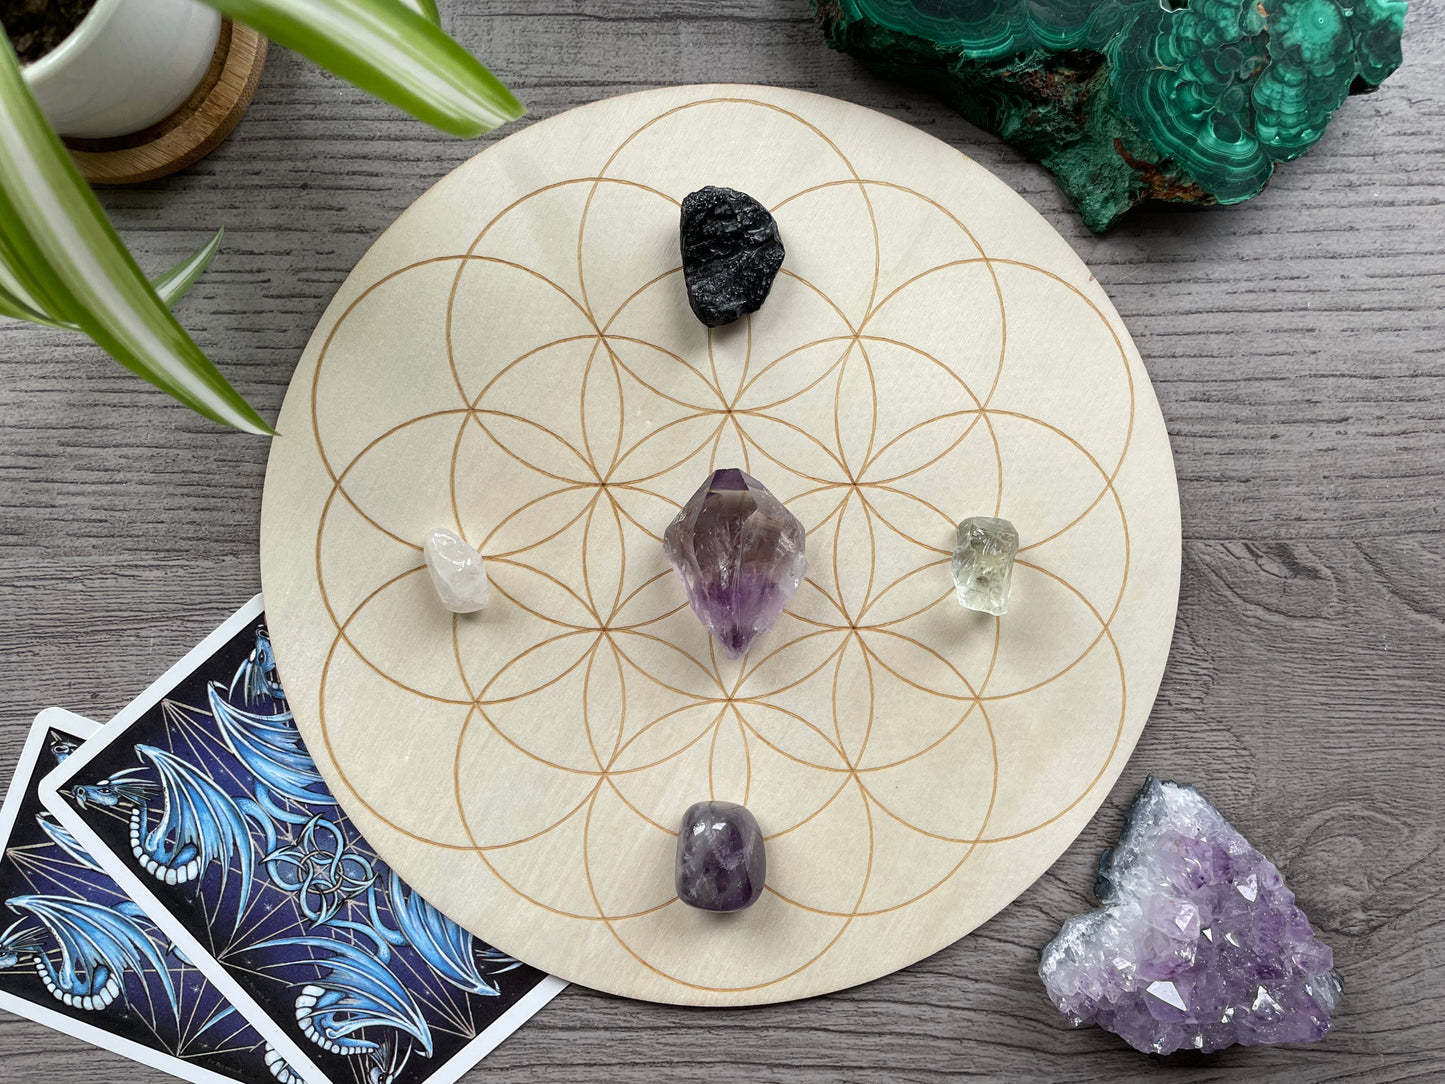 Pictured is a wood crystal grid board.